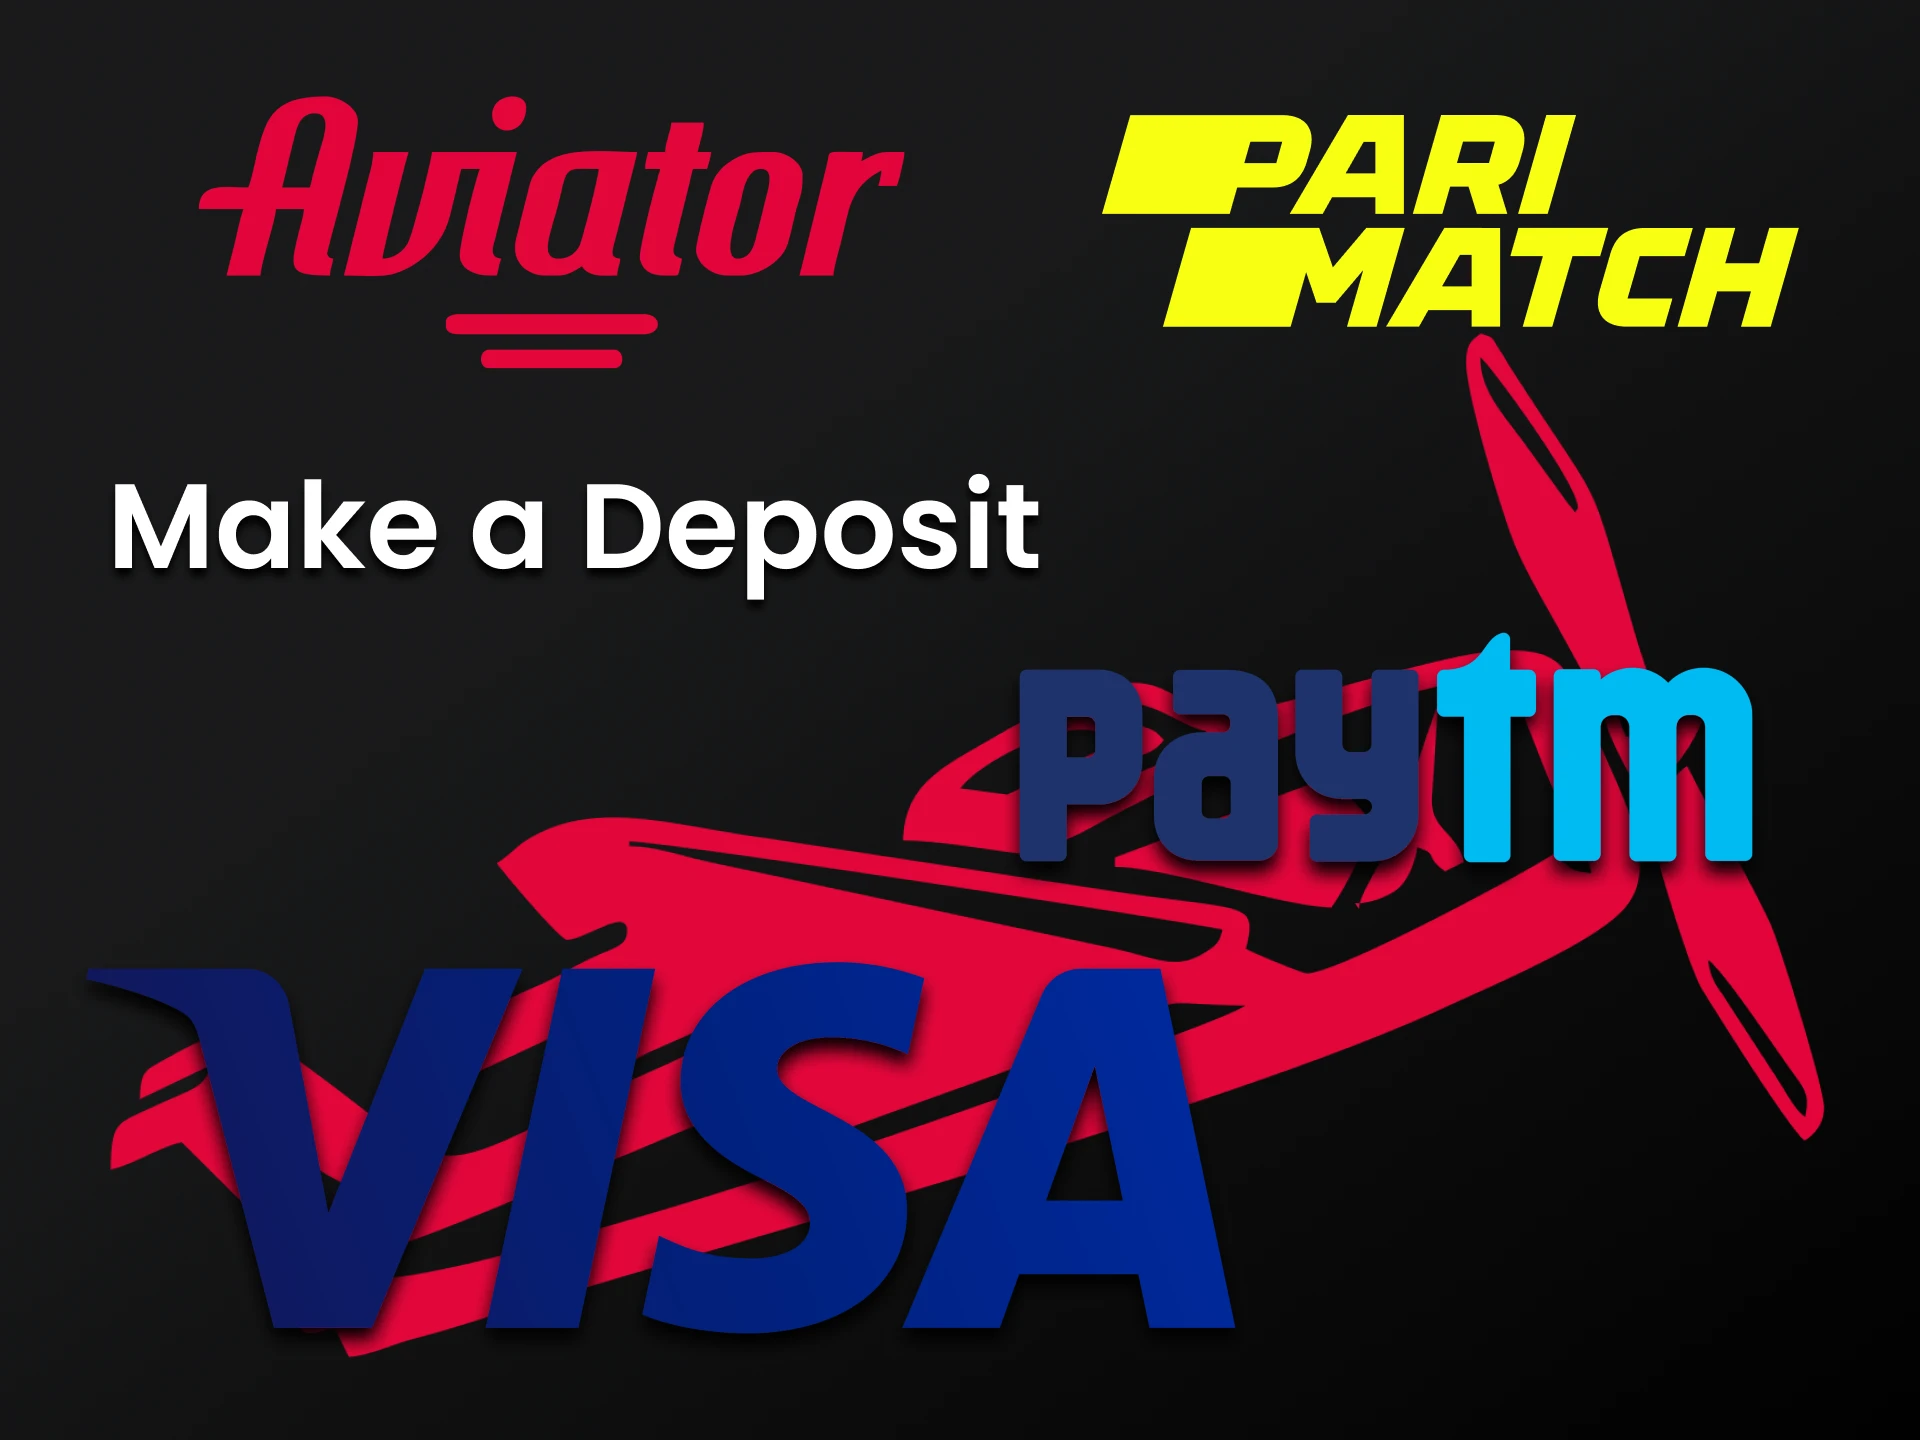 Top up your Parimatch account to play Aviator.